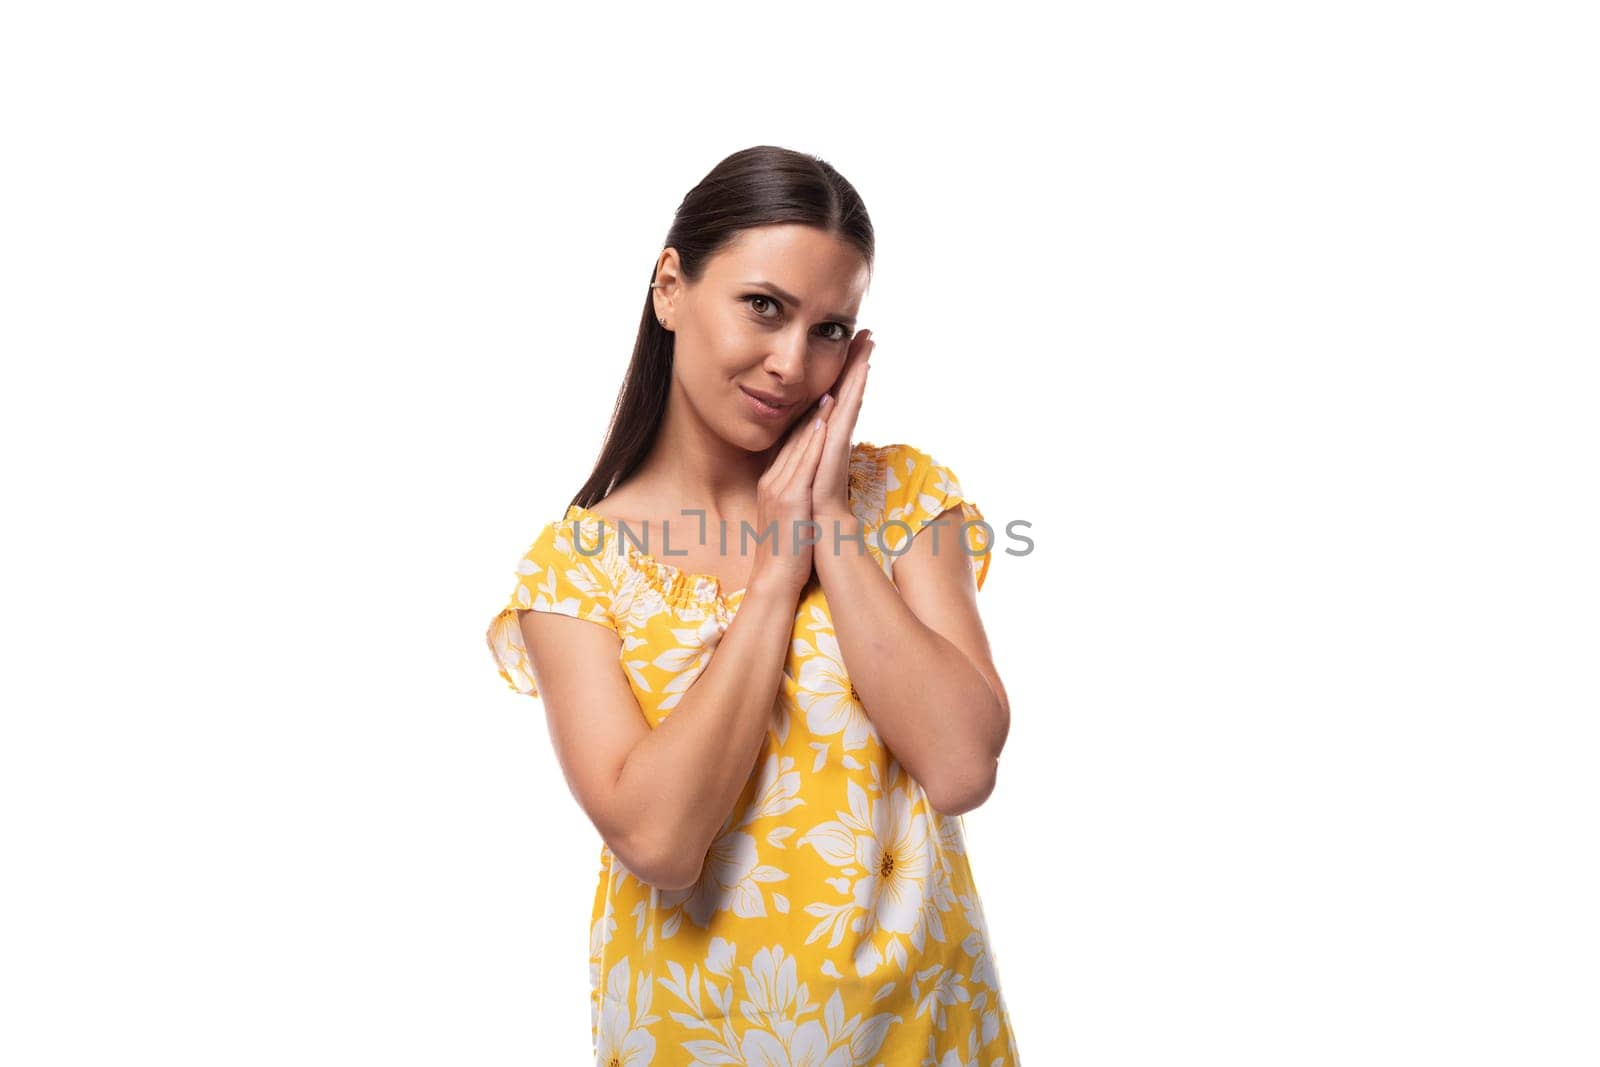 caucasian pleasant cute young woman with straight black hair dressed in a yellow sundress.